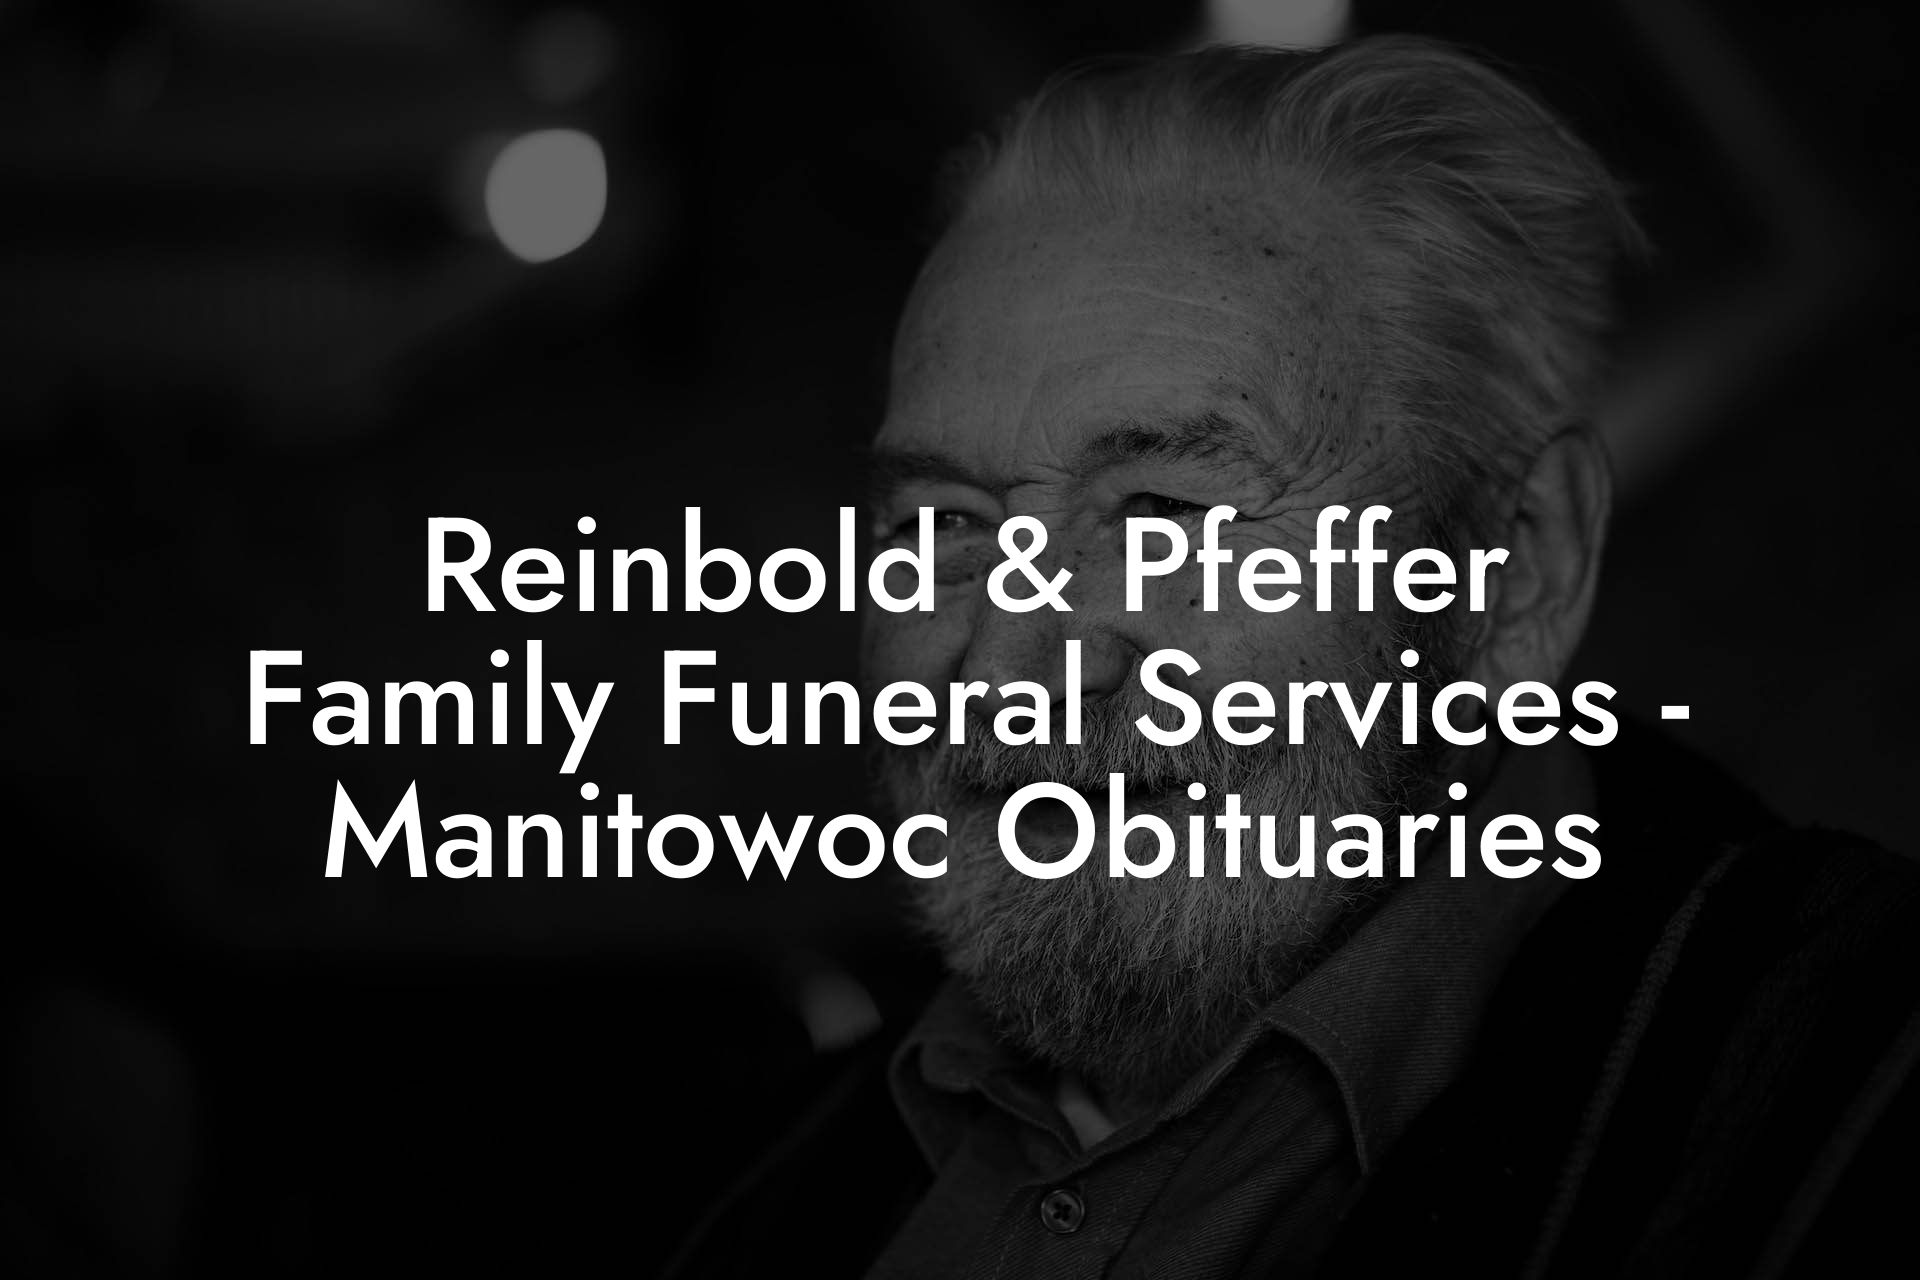 Reinbold & Pfeffer Family Funeral Services - Manitowoc Obituaries